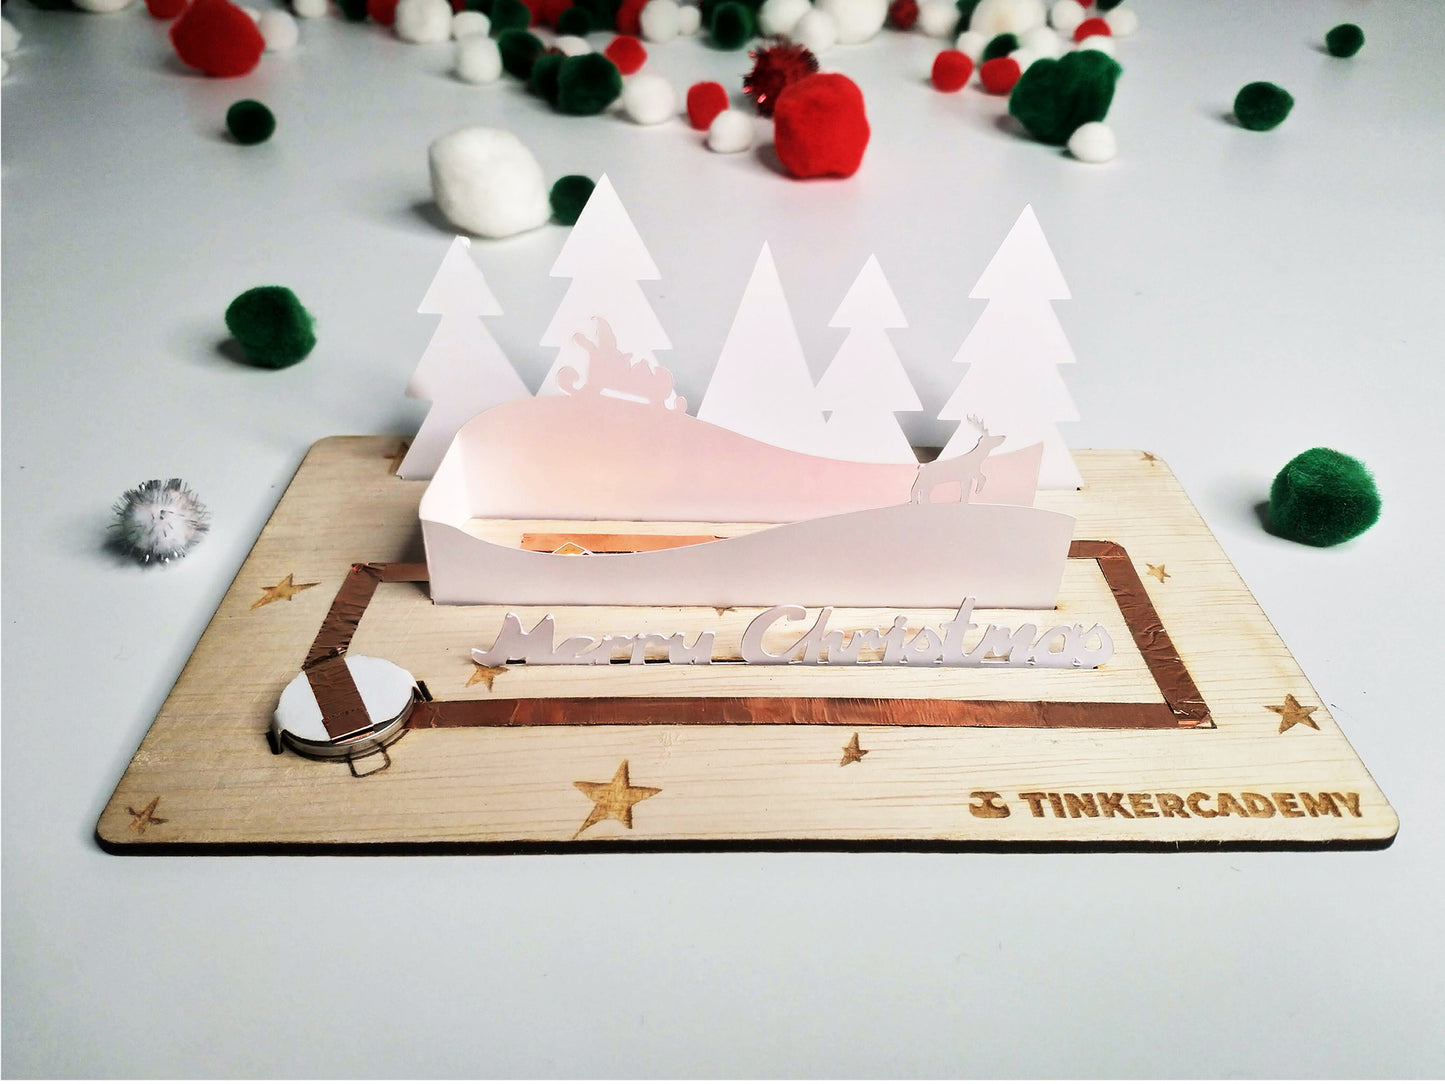 Tinkercademy's Evergreeting Diorama Kit Christmas Greeting Card; Paper craft with Chibitronic LEDs and copper tape.